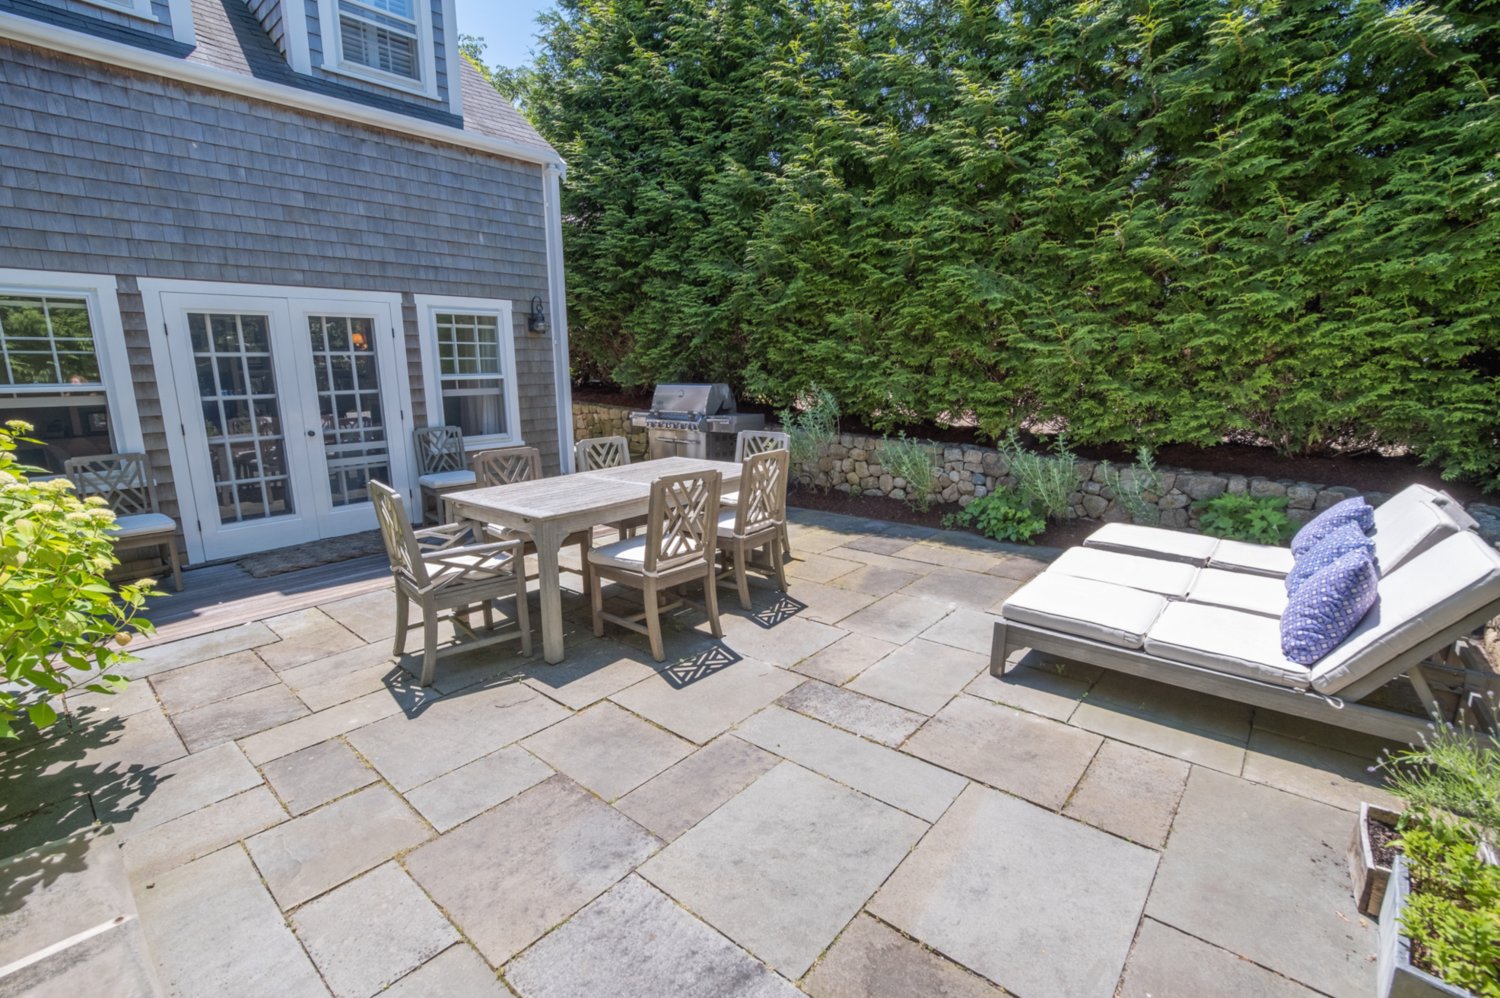 Outside the house is a stone patio with plenty of room for entertaining.